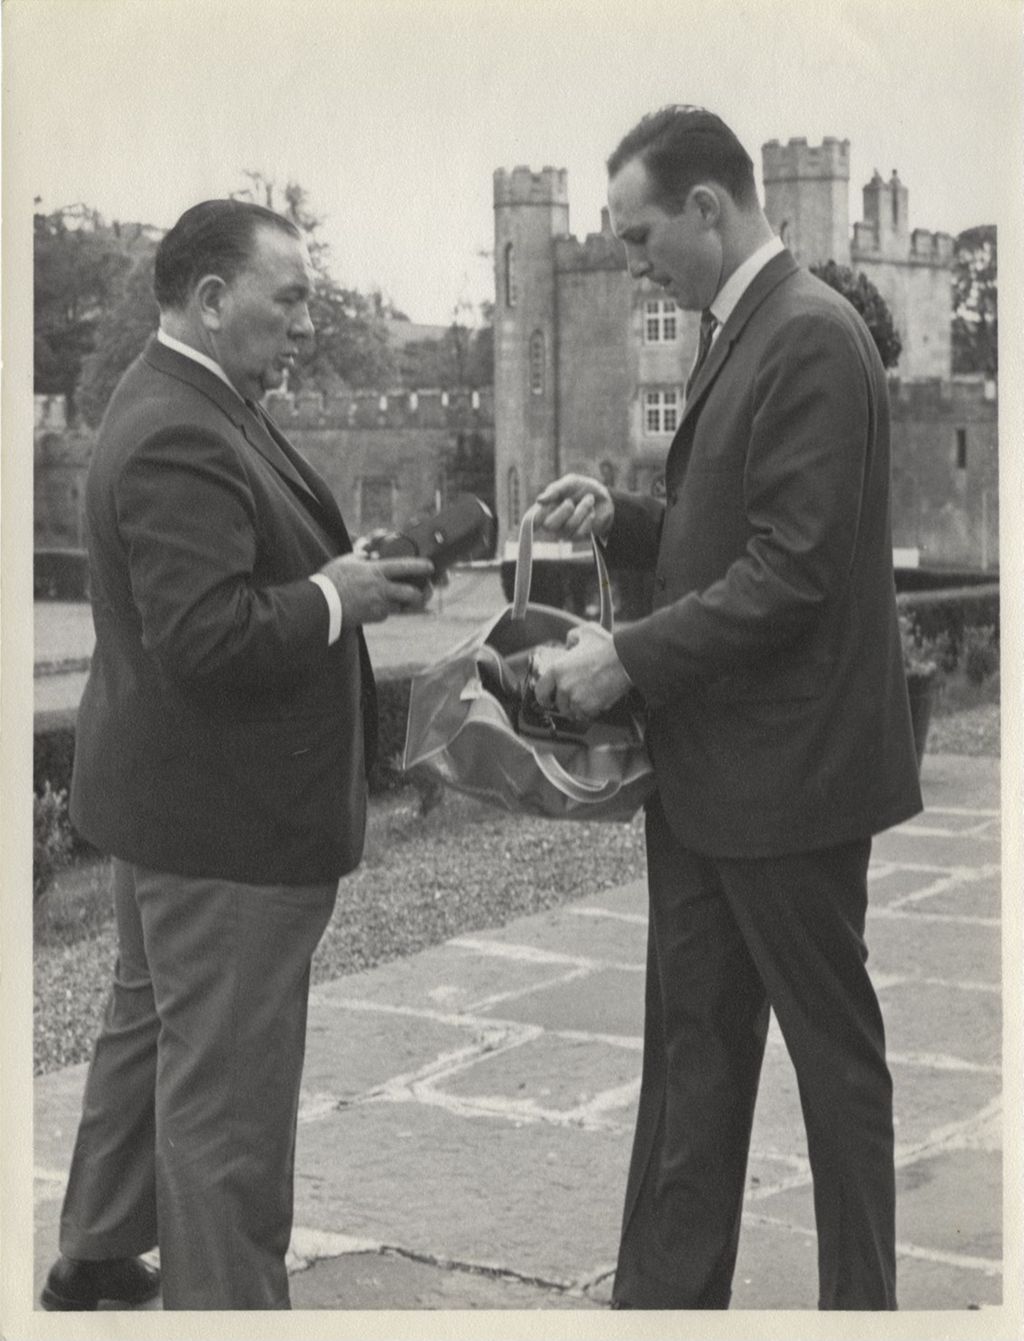 Trip to Ireland, Richard J. Daley and bodyguard outside castle